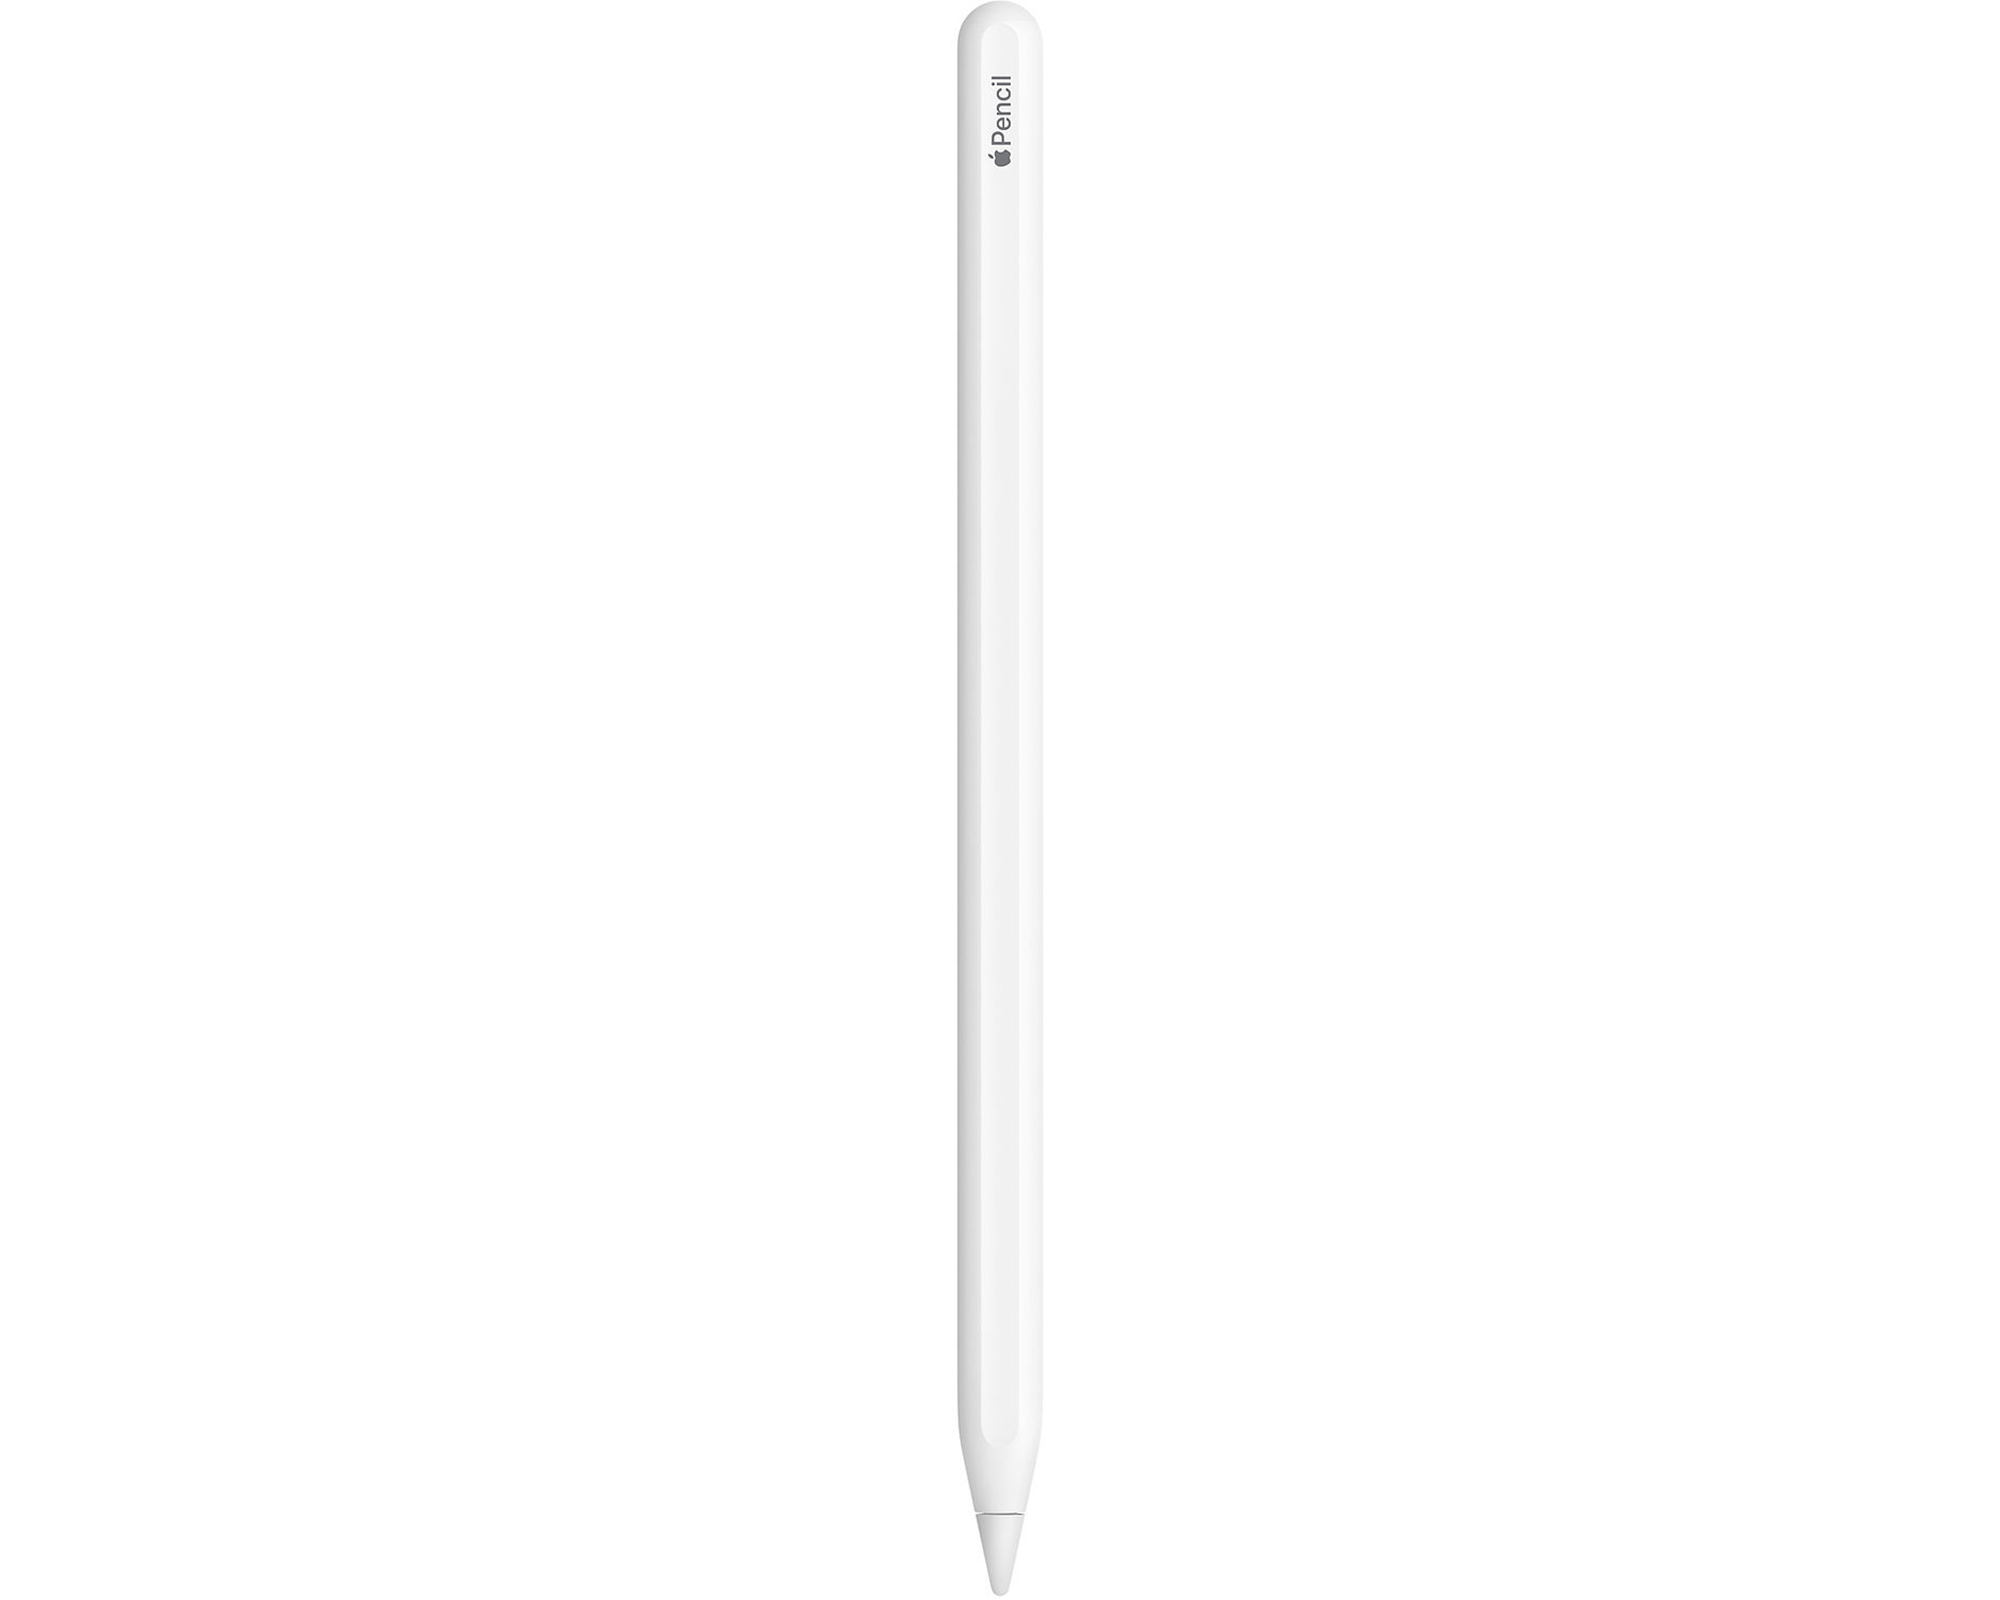 Apple Pencil (2nd Generation) - image 1 of 5